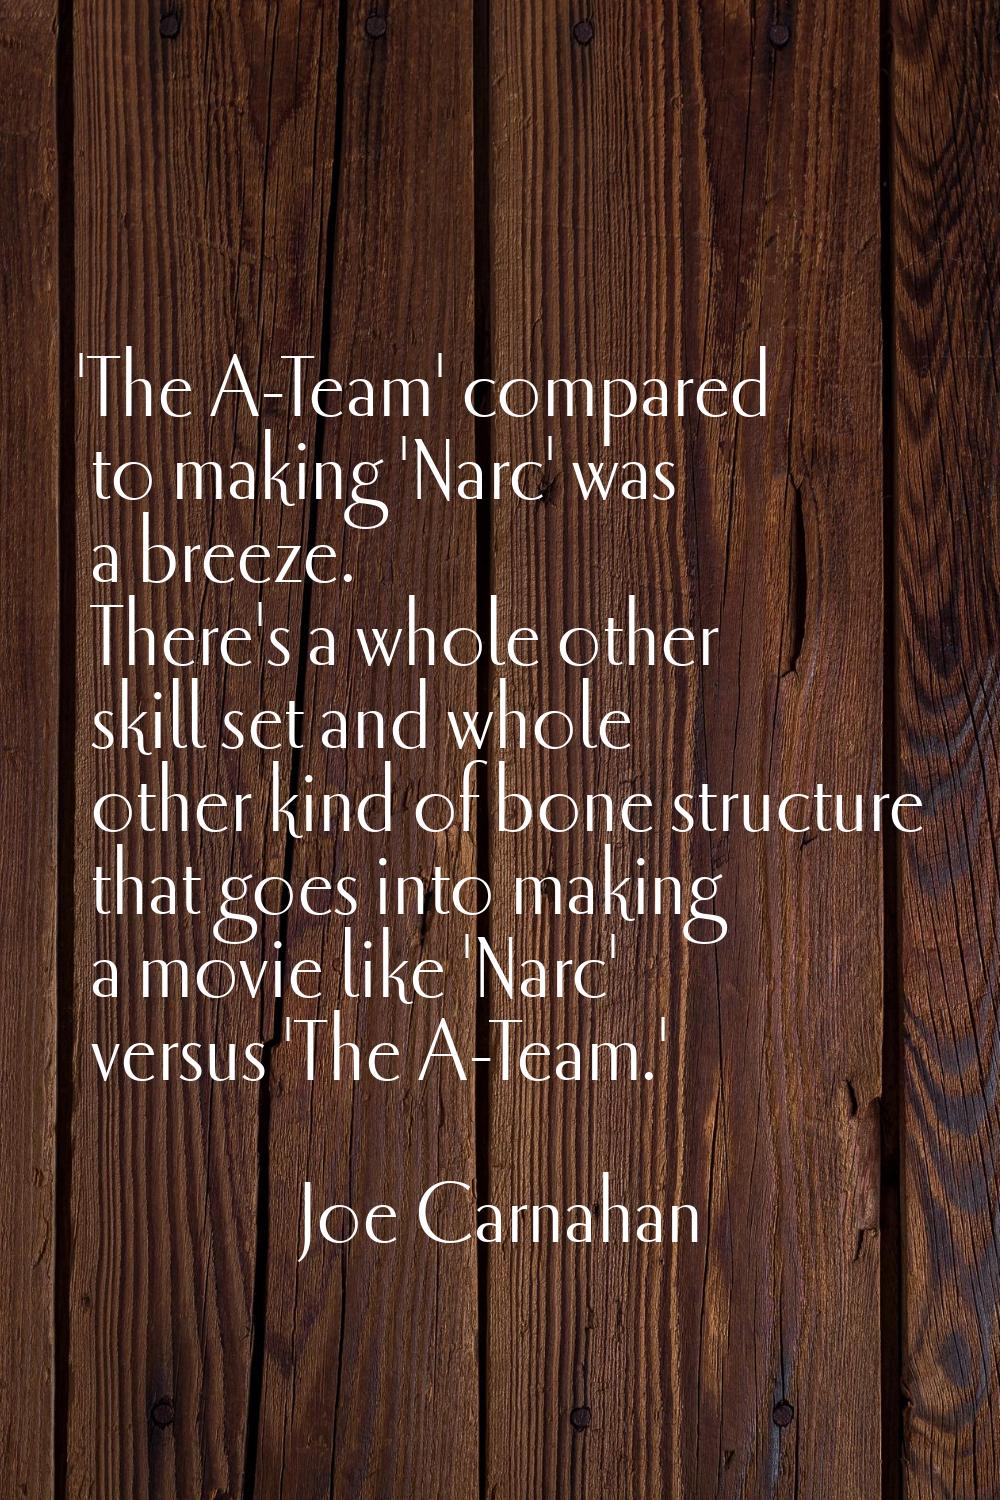 'The A-Team' compared to making 'Narc' was a breeze. There's a whole other skill set and whole othe